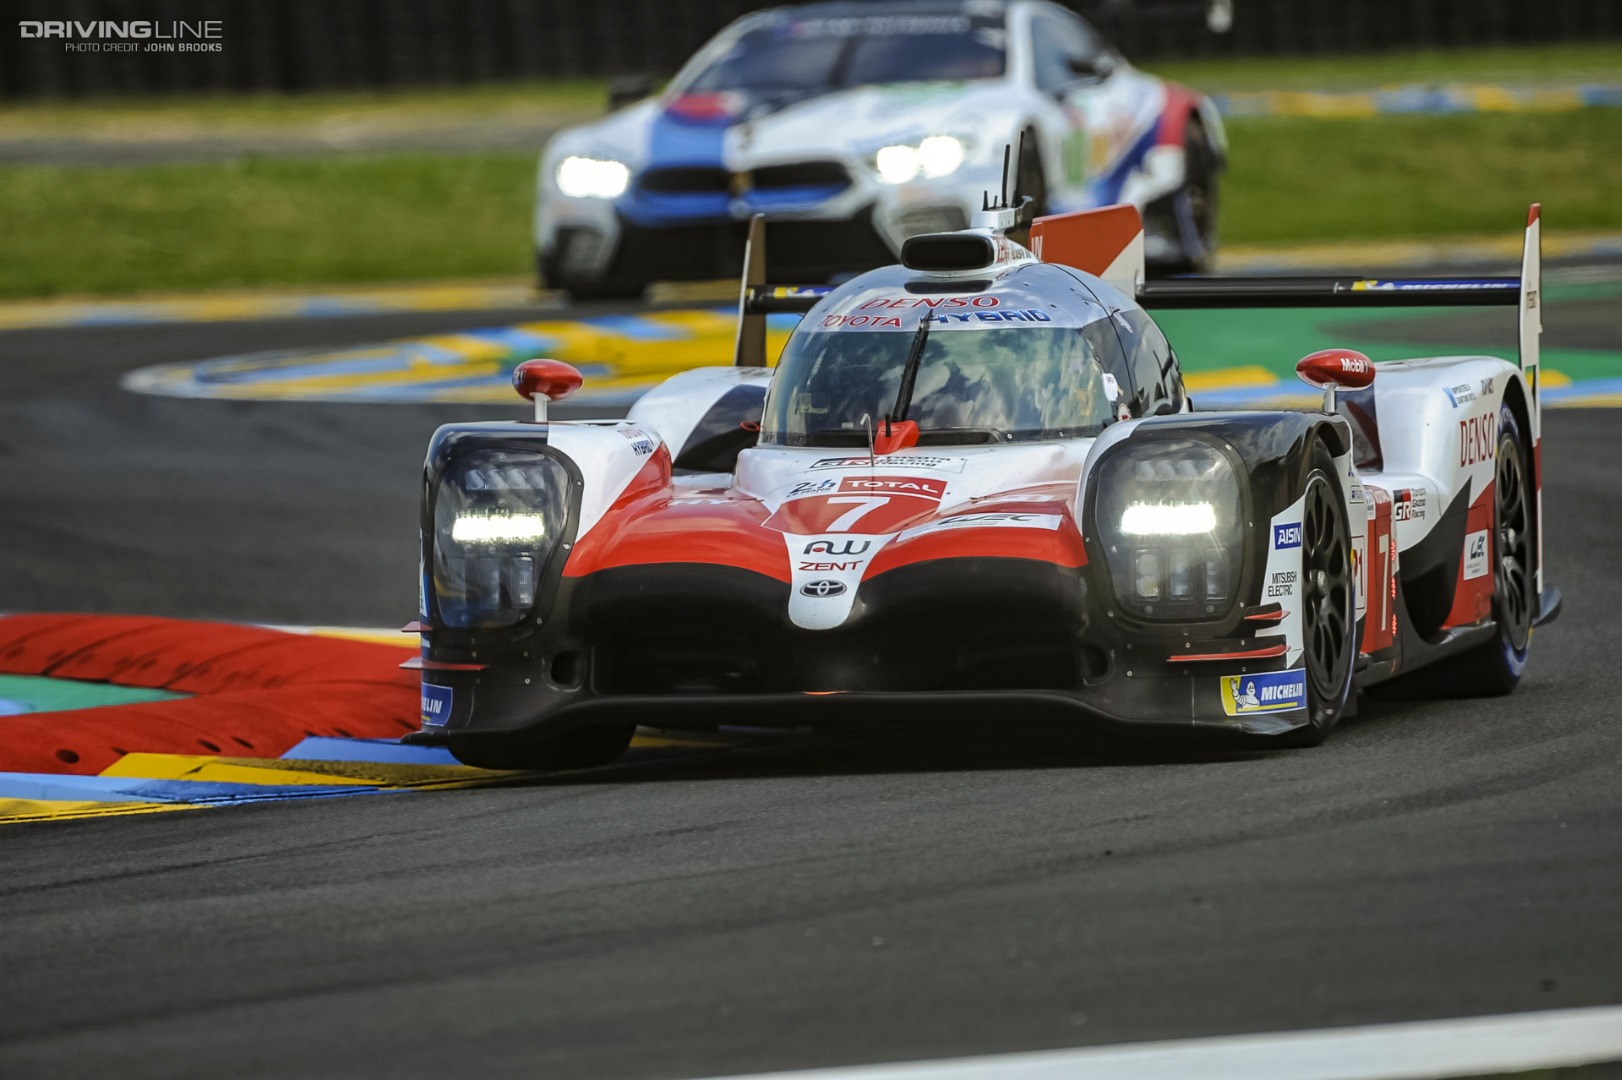 Sinewi Dated average The Long Road to Victory: Toyota Wins Le Mans | DrivingLine